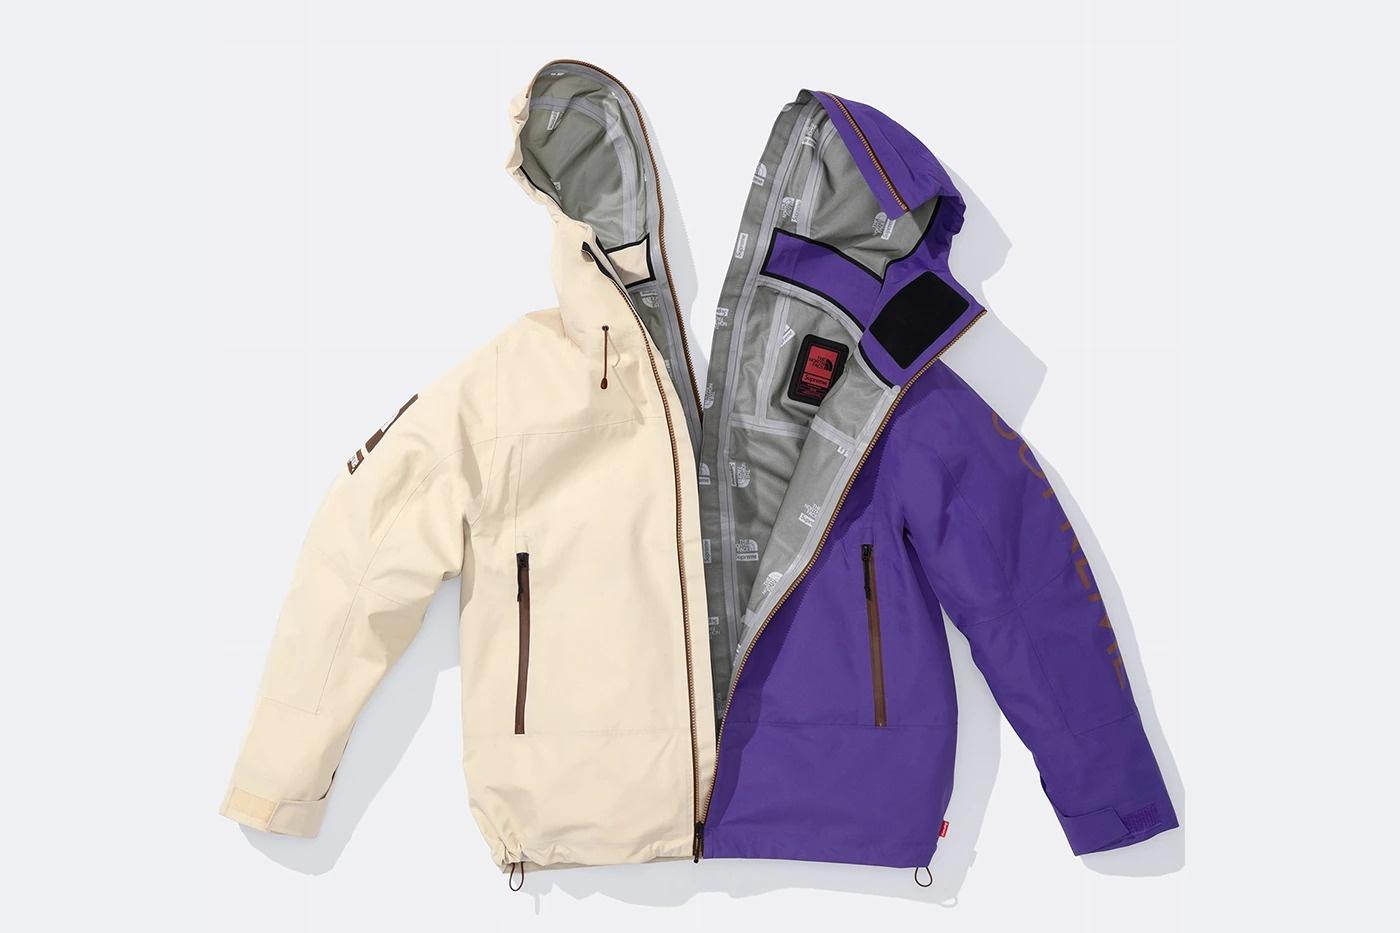 The latest Supreme x The North Face collab